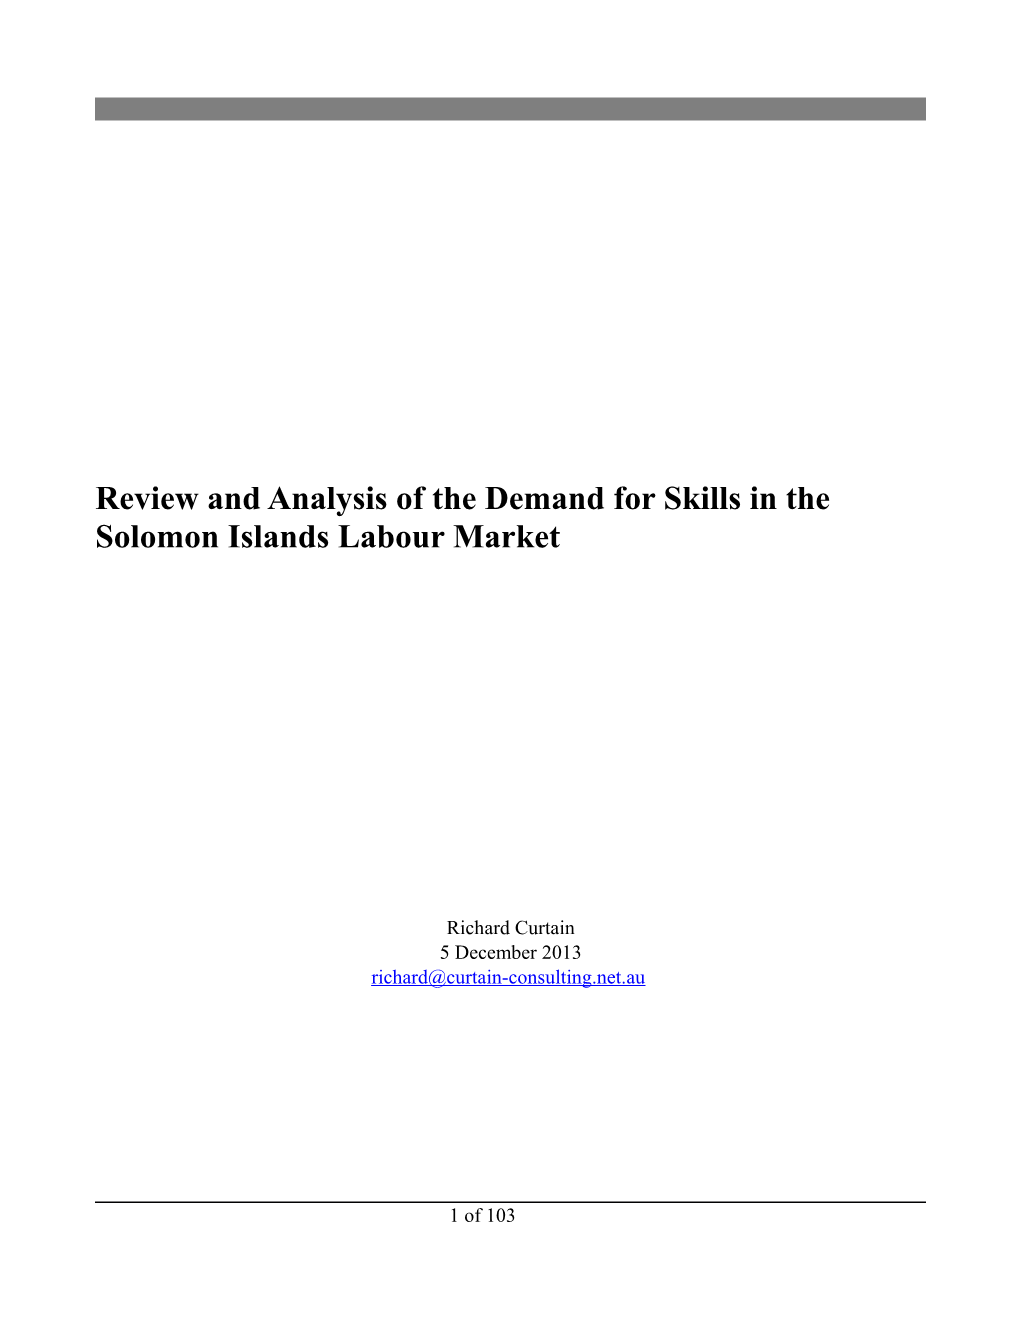 Review and Analysis of the Demand for Skills in the Solomon Islands Labour Market